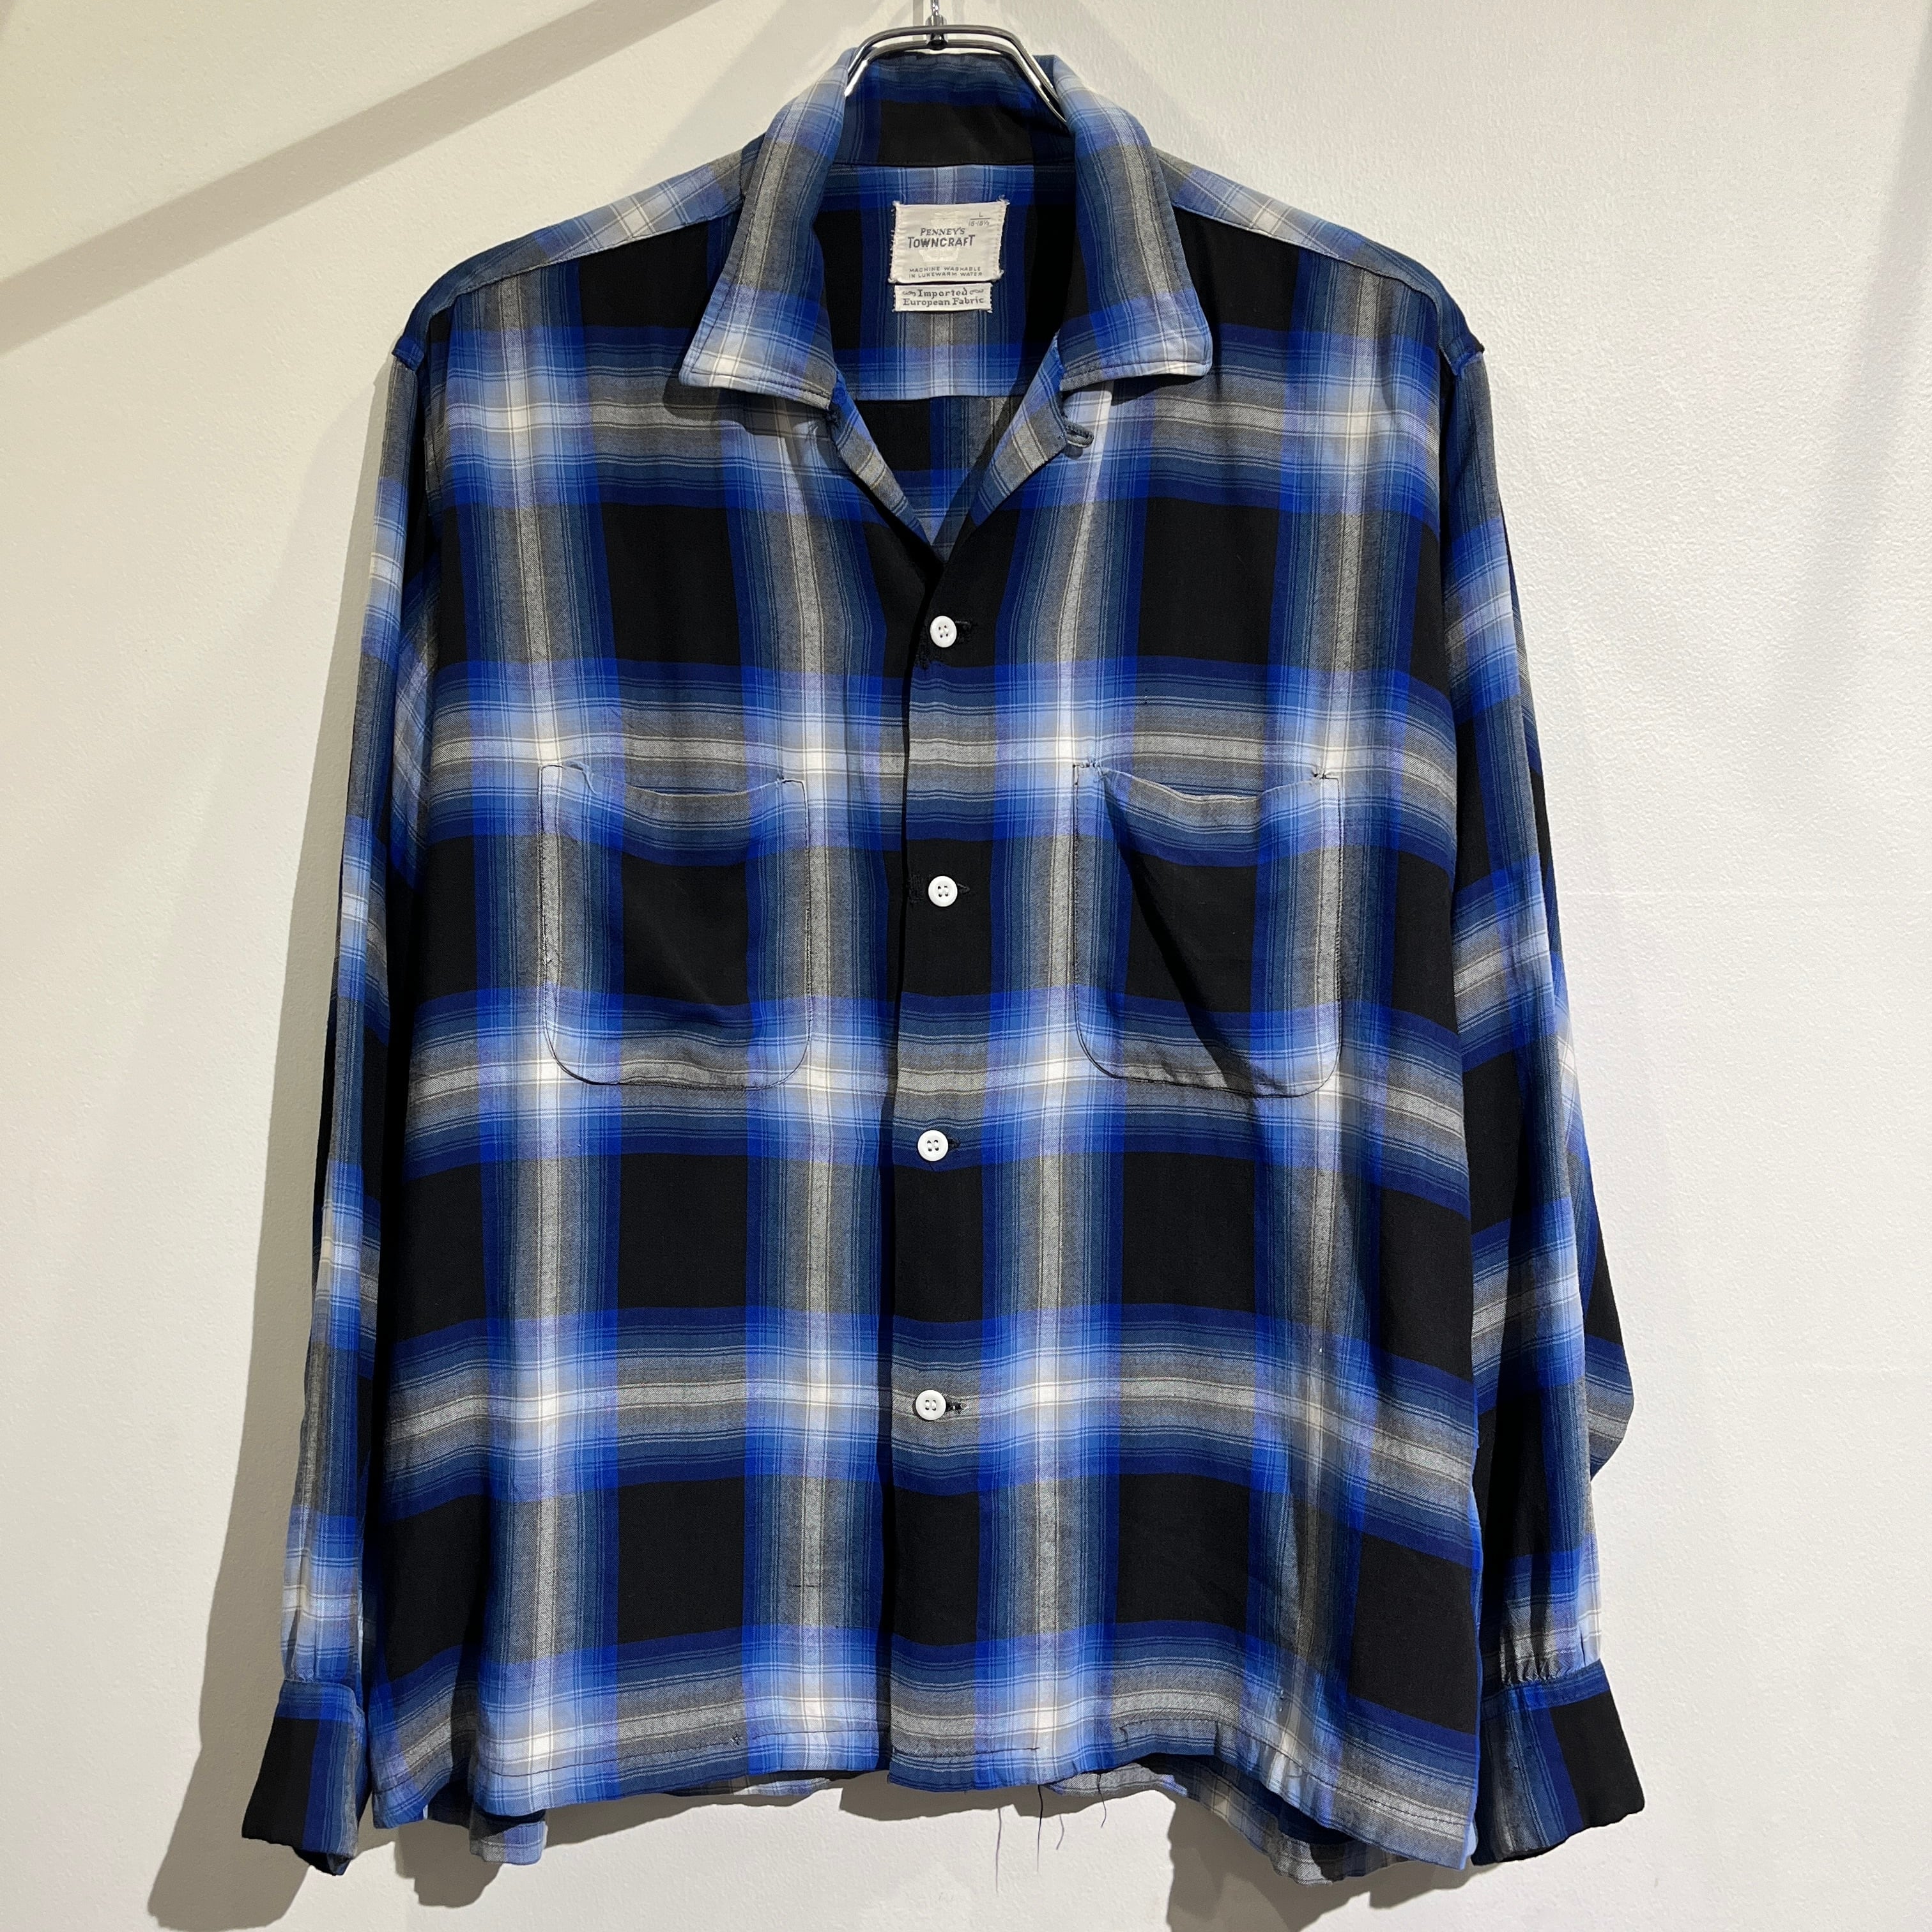 60s TOWNCRFT Ombre Check Rayon Shirt 60年代 タウンクラフト オンブレ レーヨン シャツ 黒青 16 1/2  グランジ